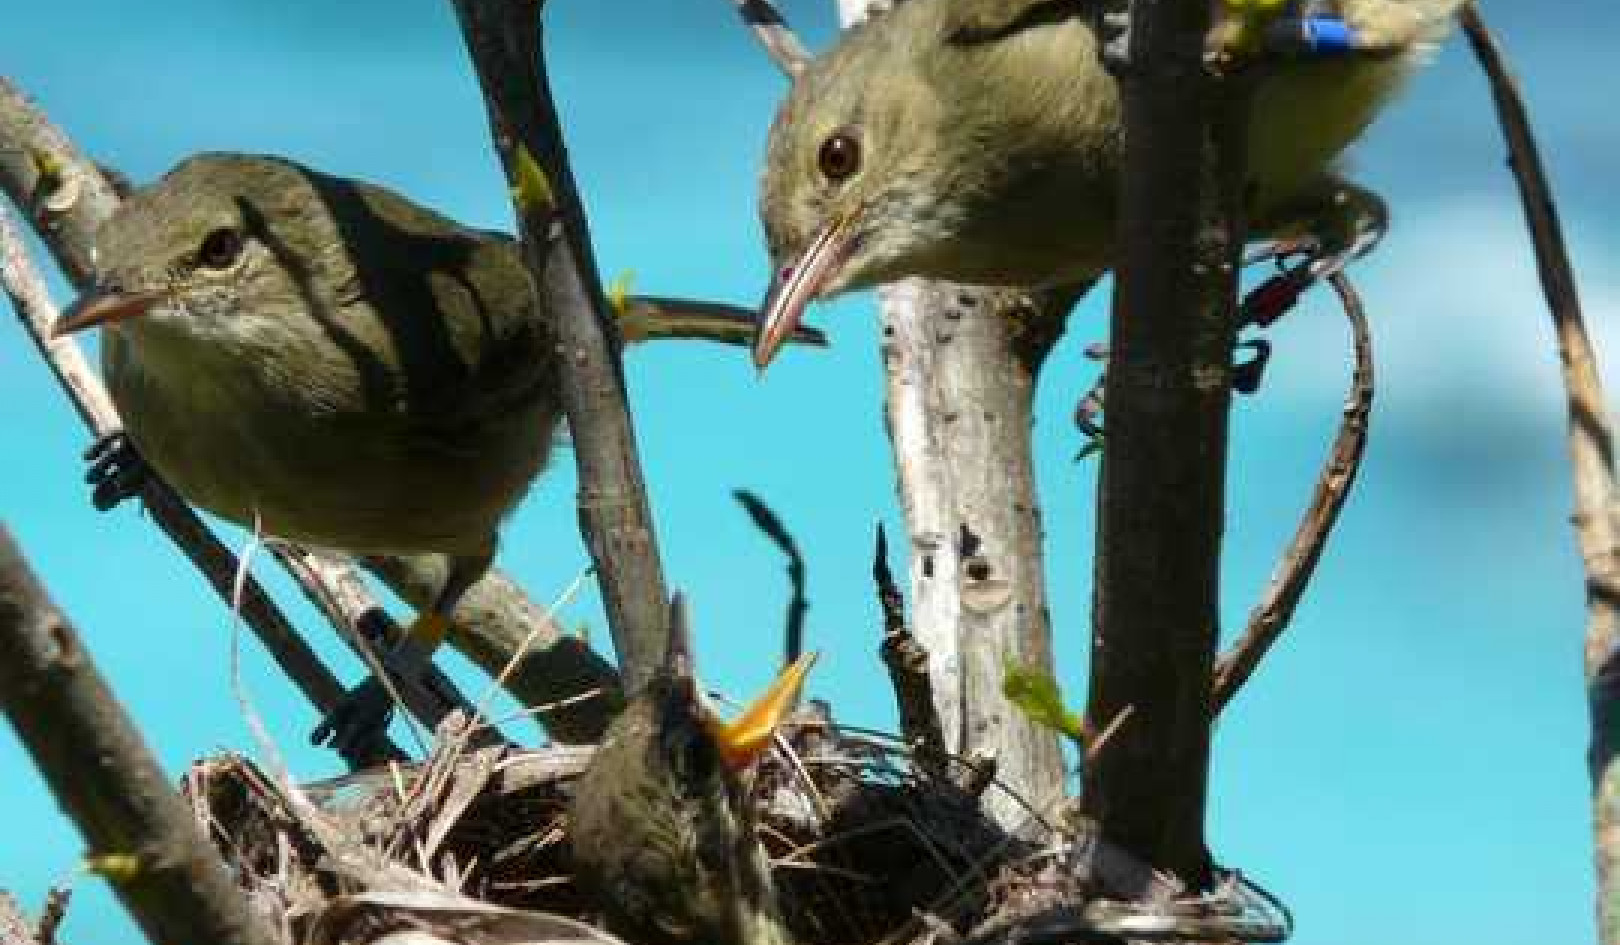 Female Warblers Live Longer When They Have Help Raising Offspring